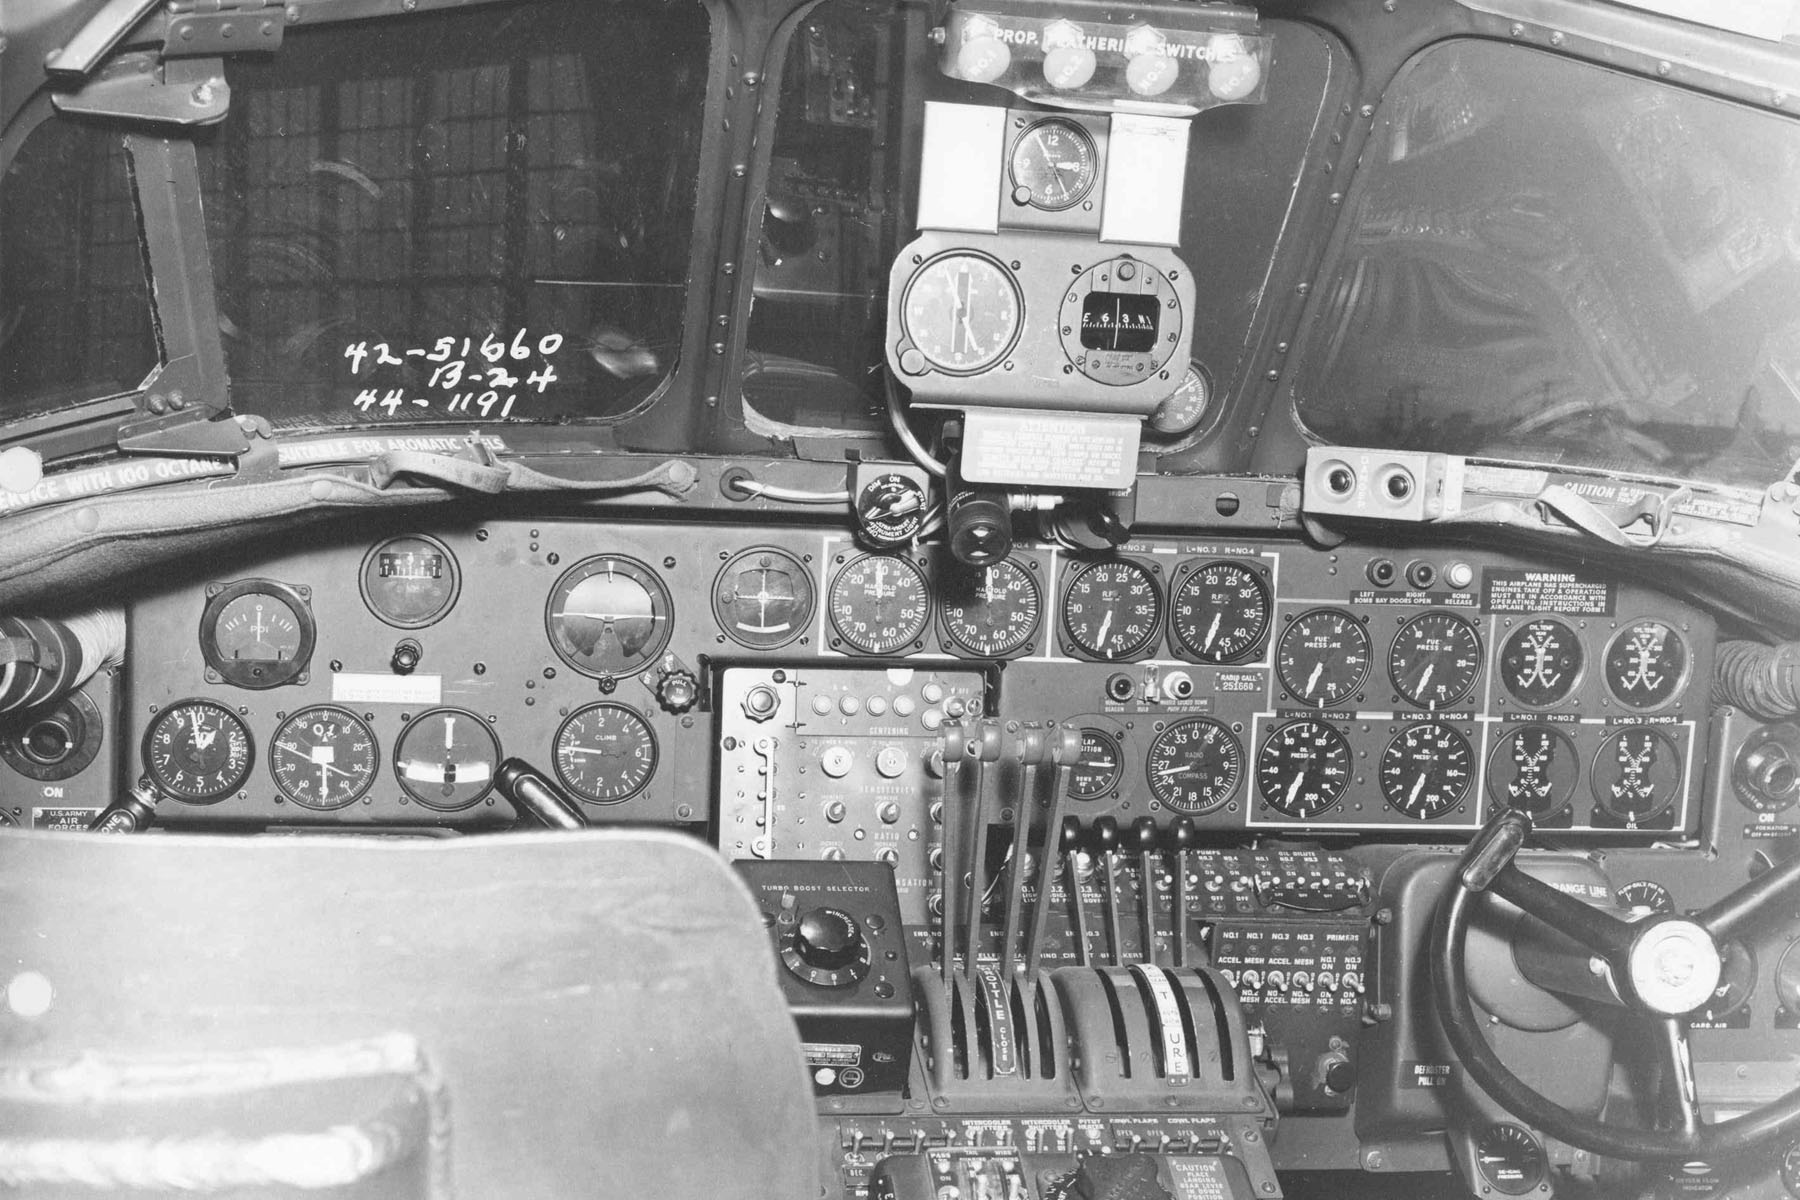 Cockpit of a B-24J Liberator bomber, date unknown